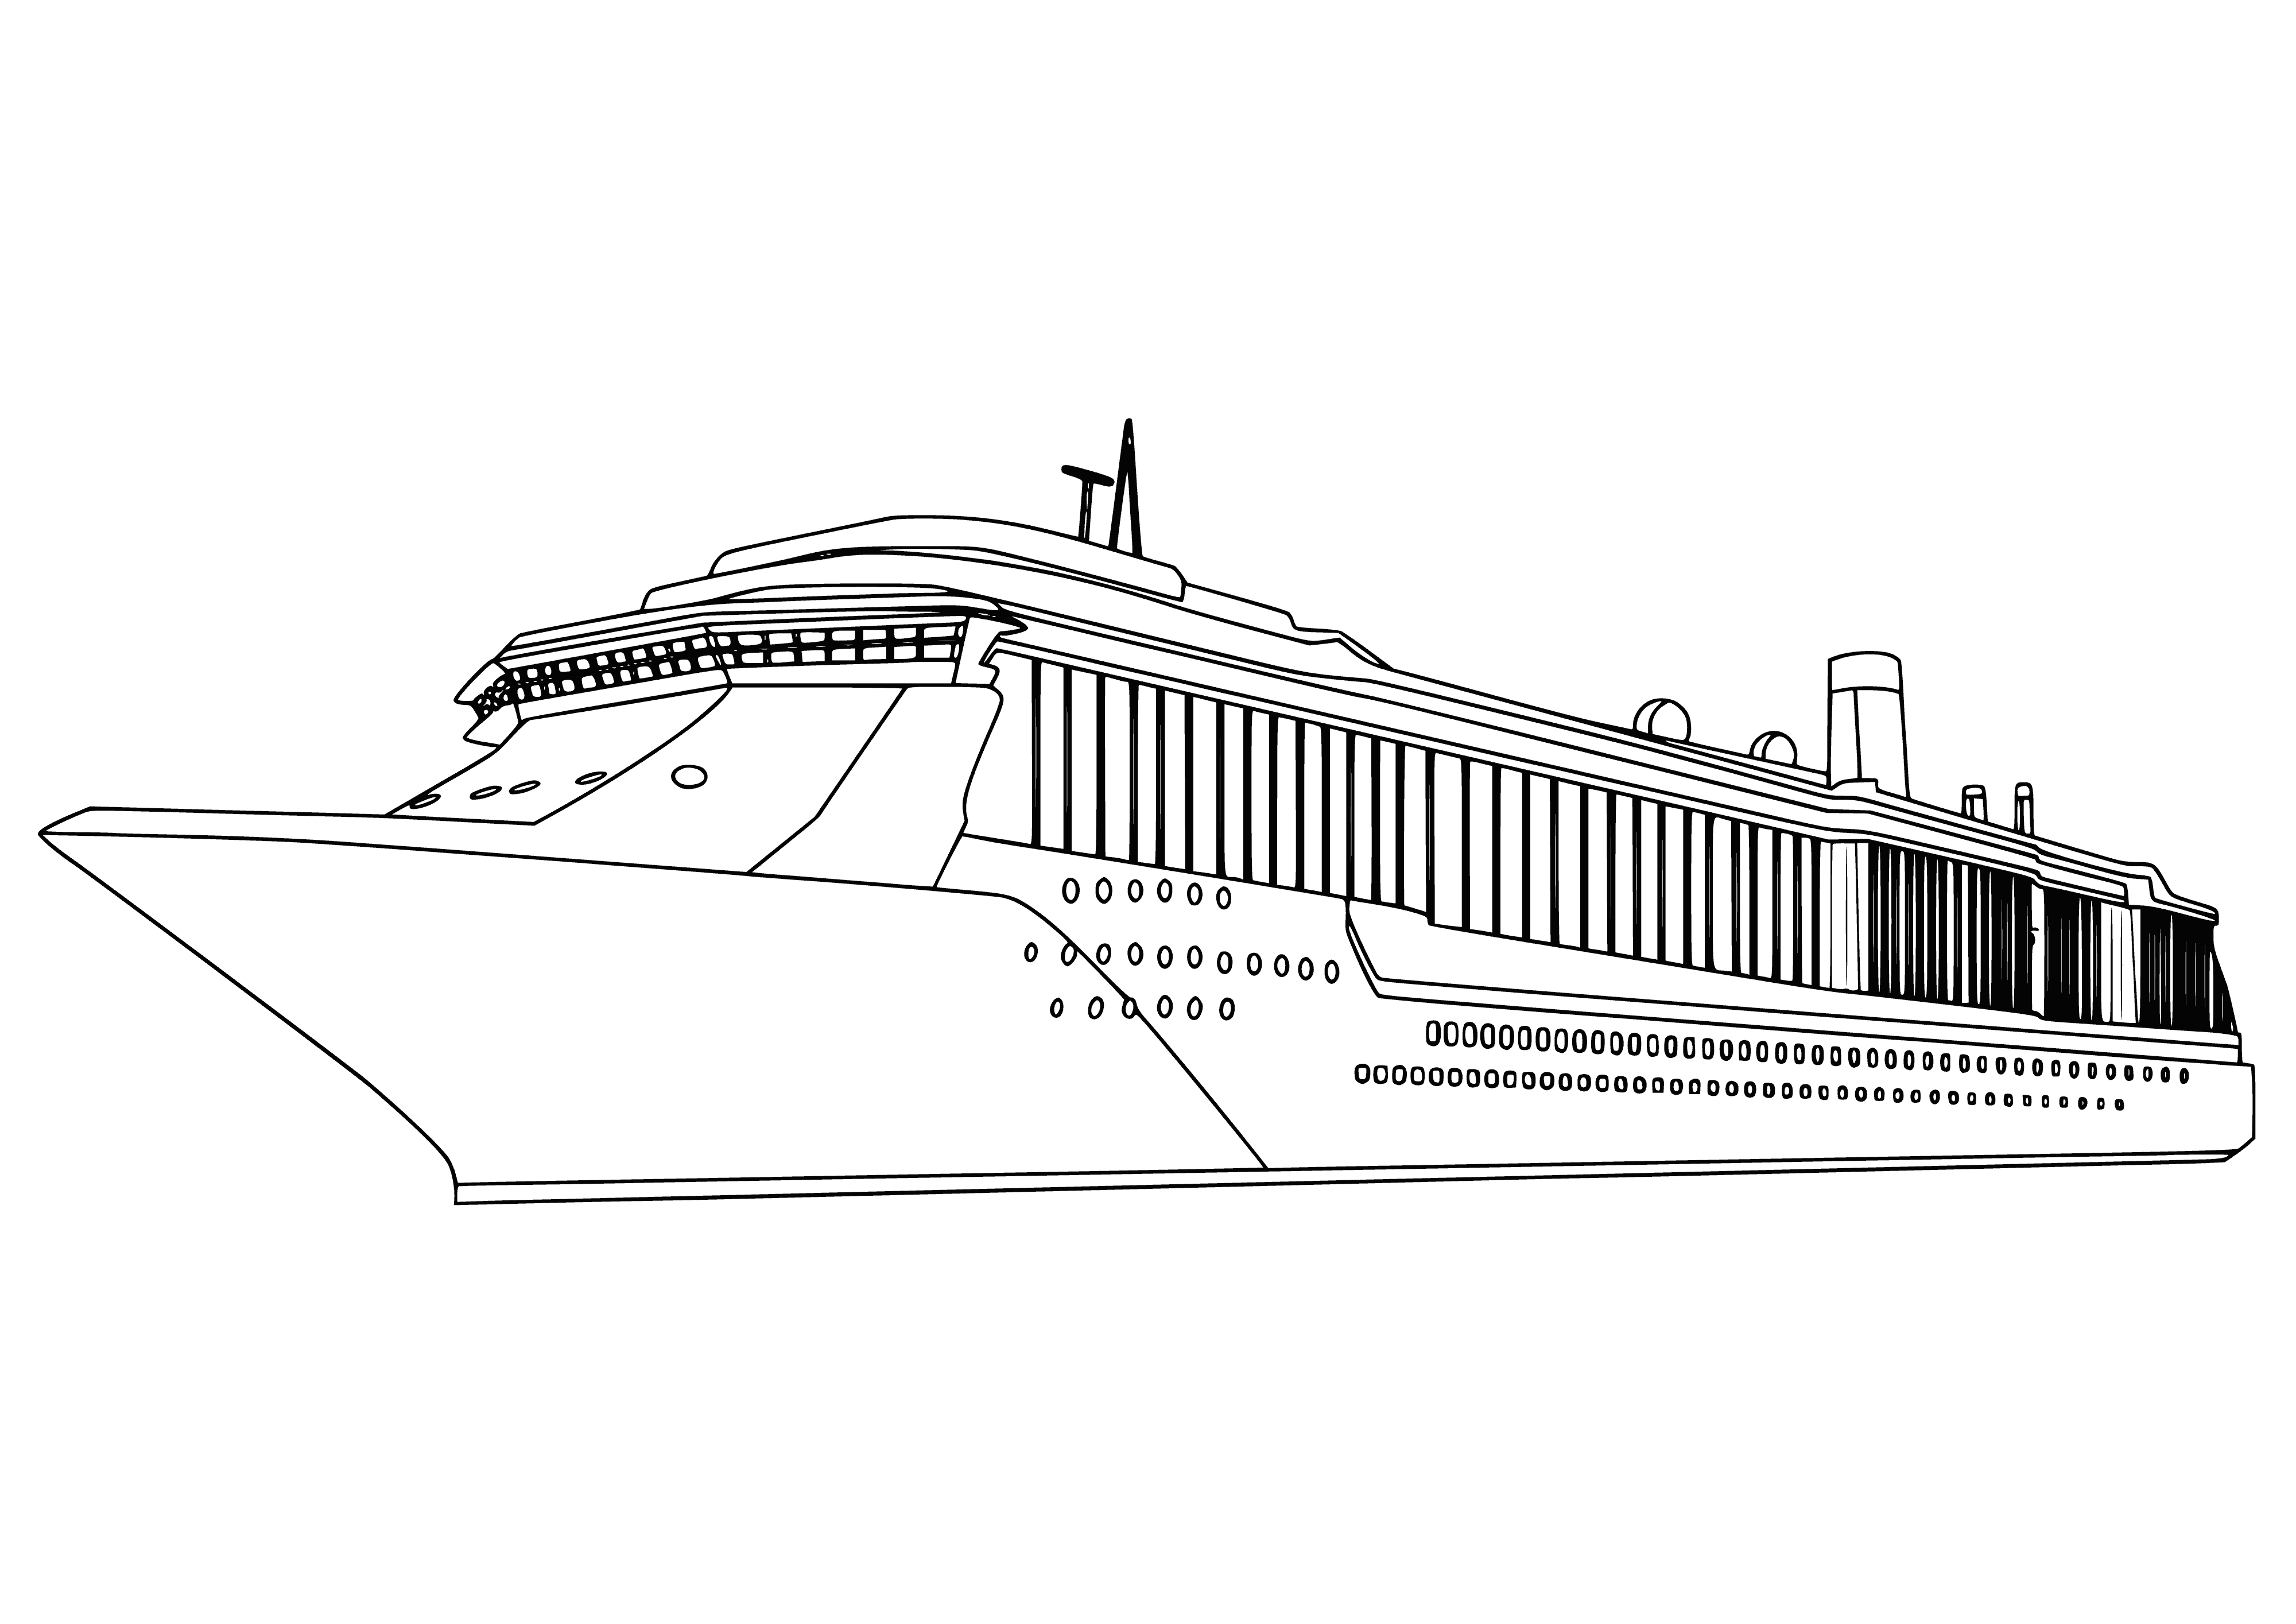 coloring page: Luxurious ocean liner has multiple decks, lifeboats, and suites for guests to stay in while traveling across the sea. #Travel